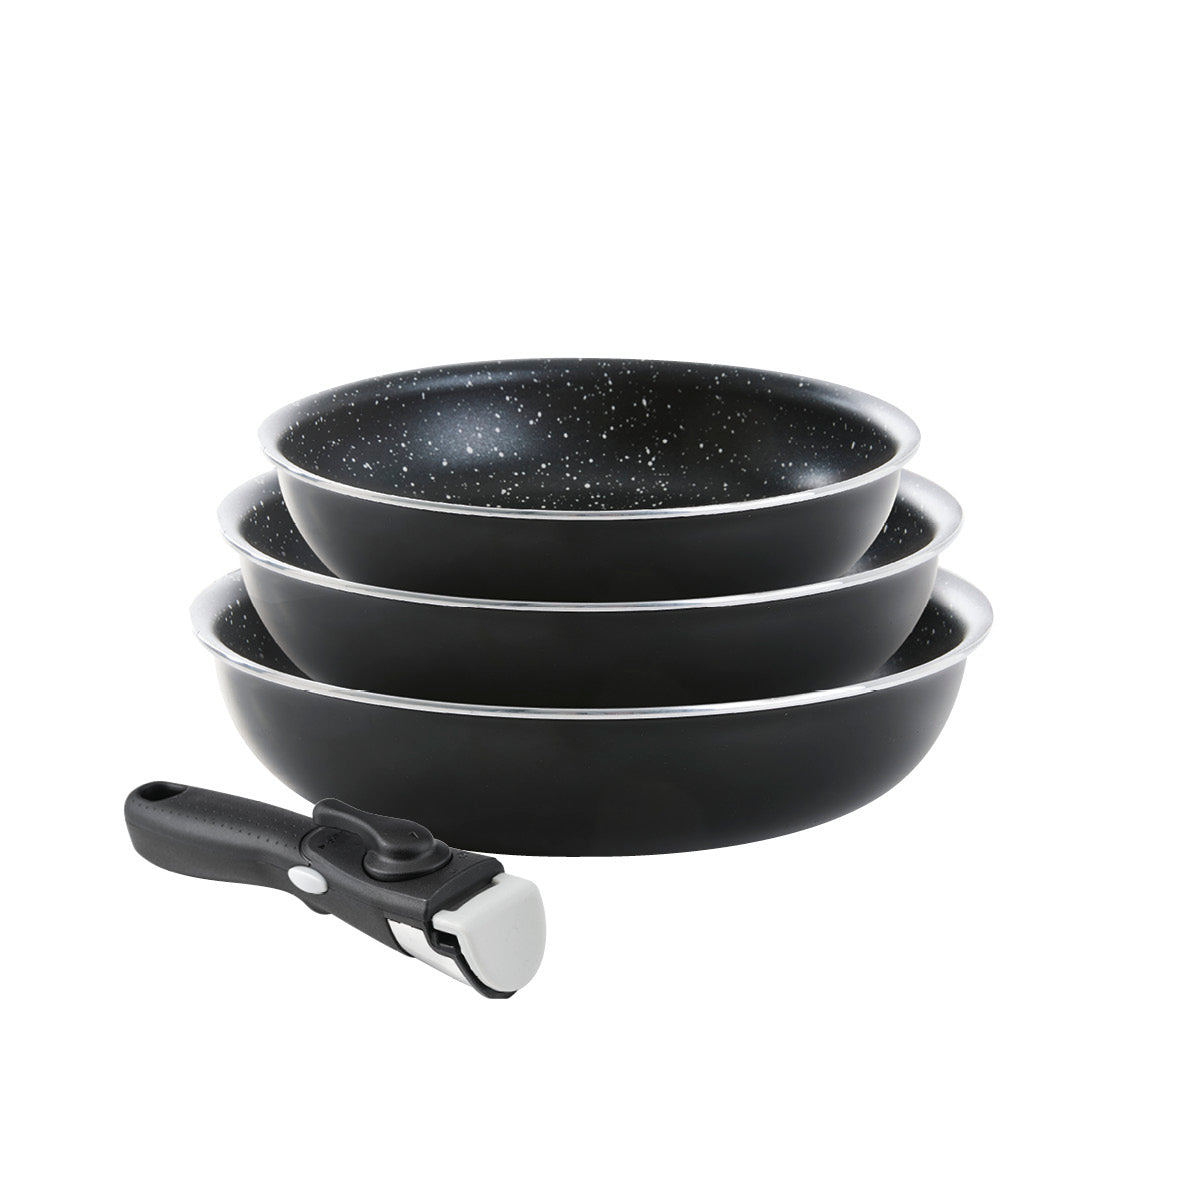 Set of 3 frypans with removable handle - Black